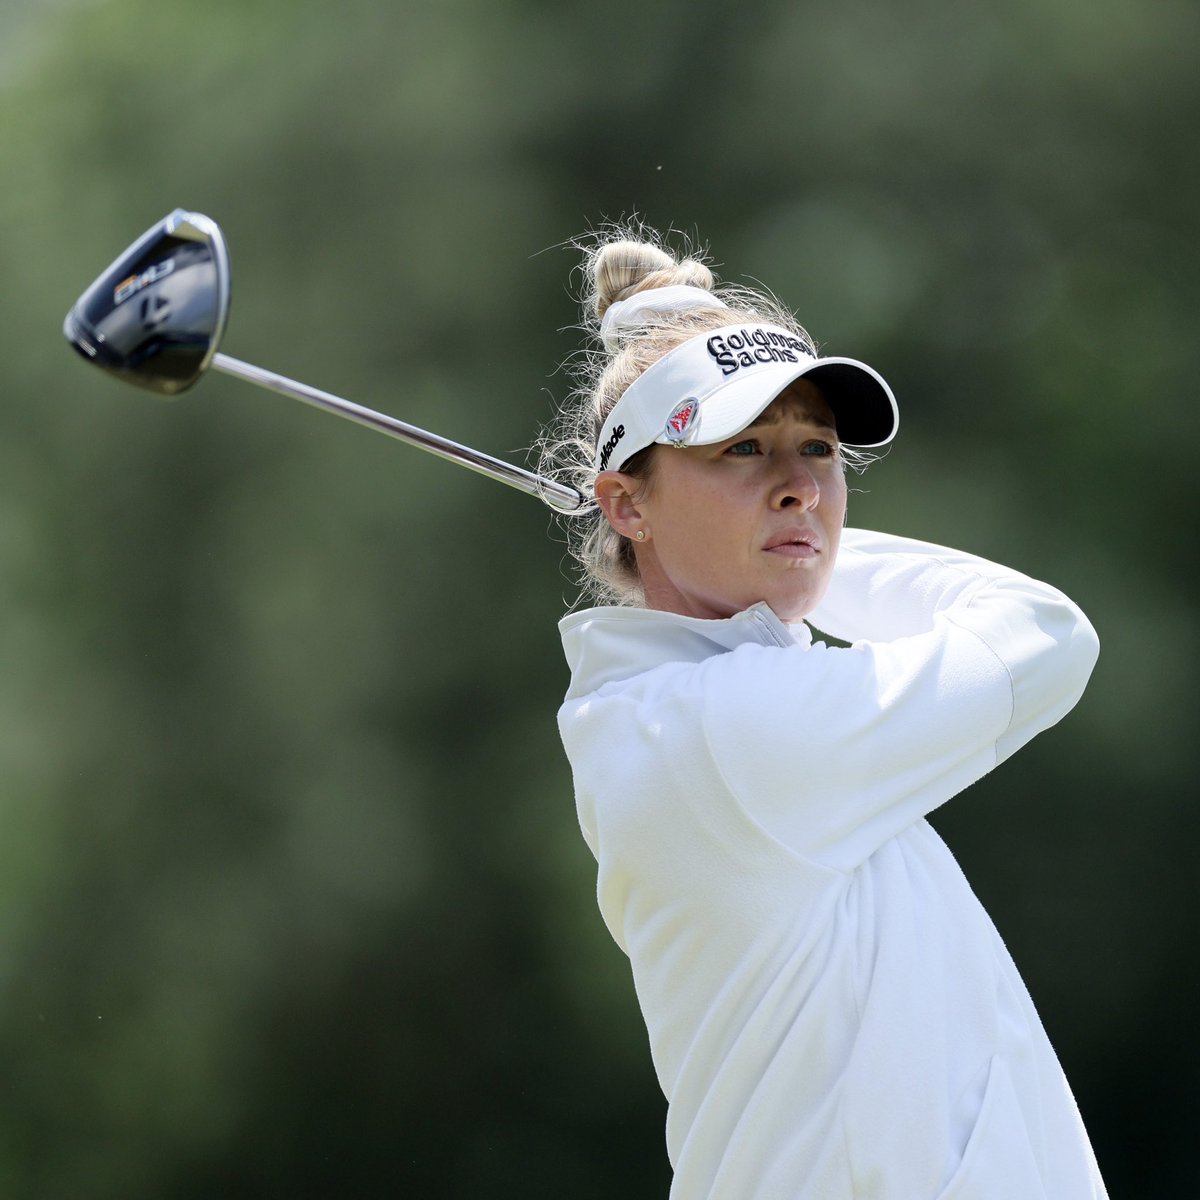 .@NellyKorda. Three shot lead. 💪

She put together a flawless front nine hitting 6/7 fairways and carding three birdies to start separating herself from the field. #Qi10Driver